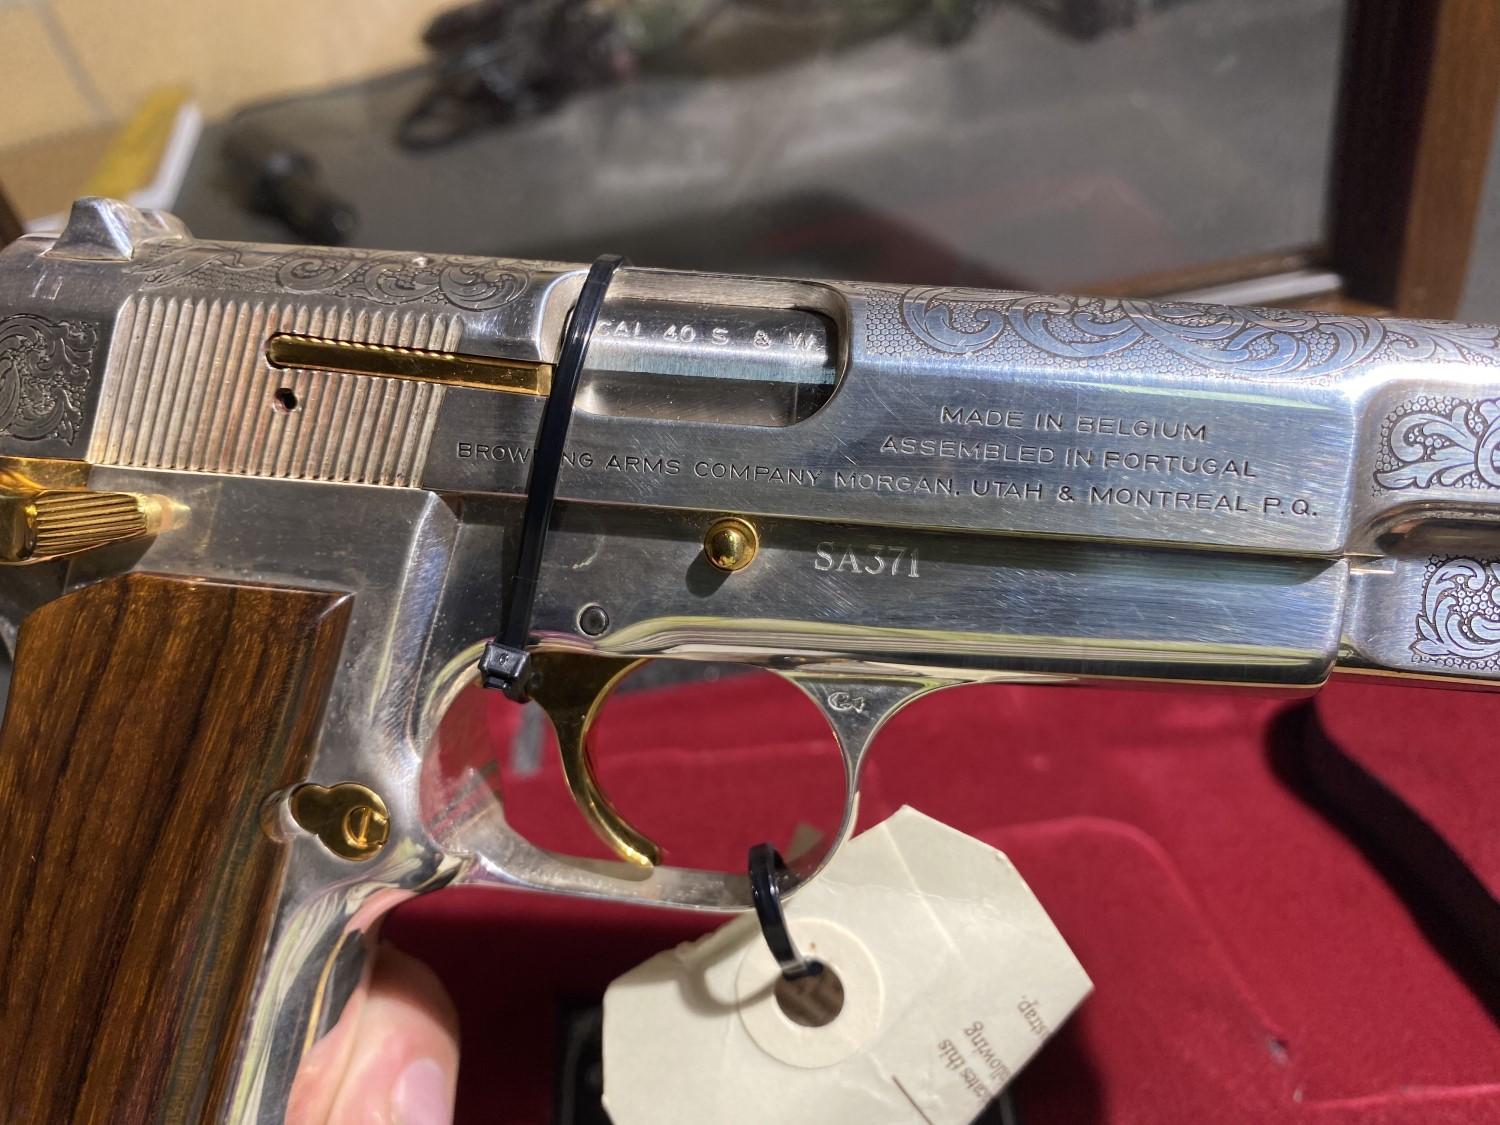 Browning High Power commemorative Pistol in Case